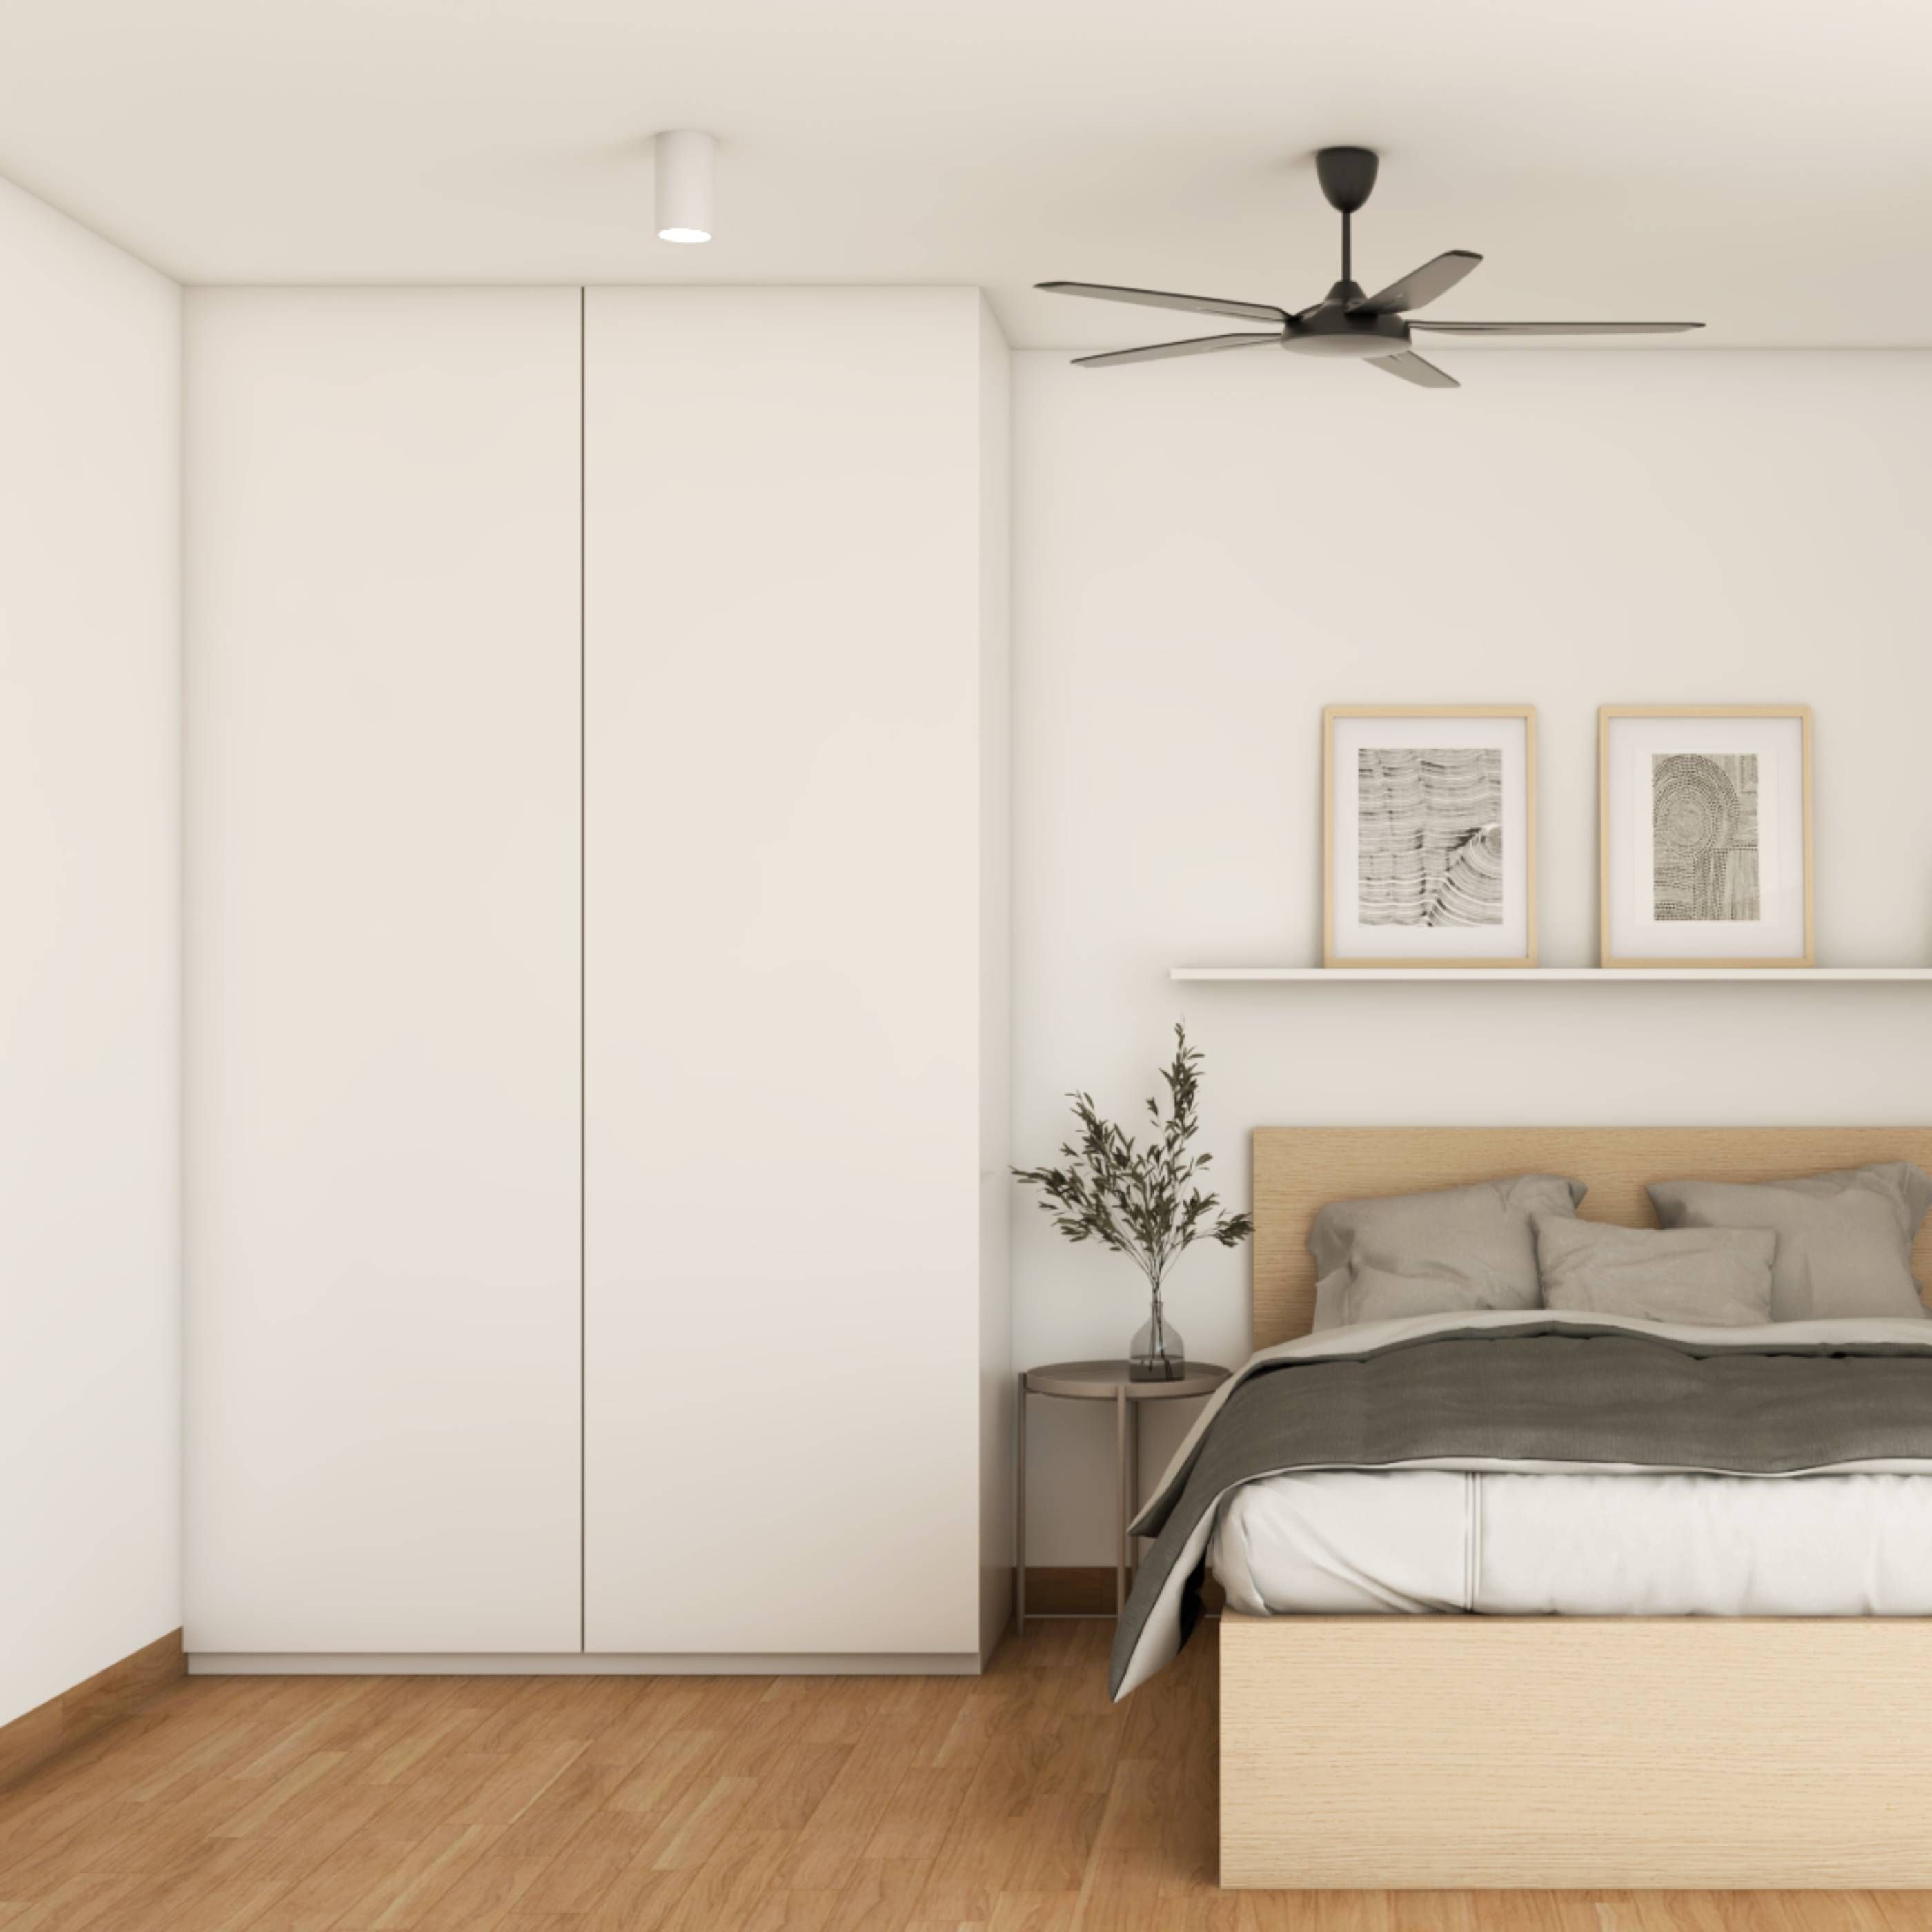 Minimalist Design With A Floor-To-Ceiling Swing Shutter Wardrobe